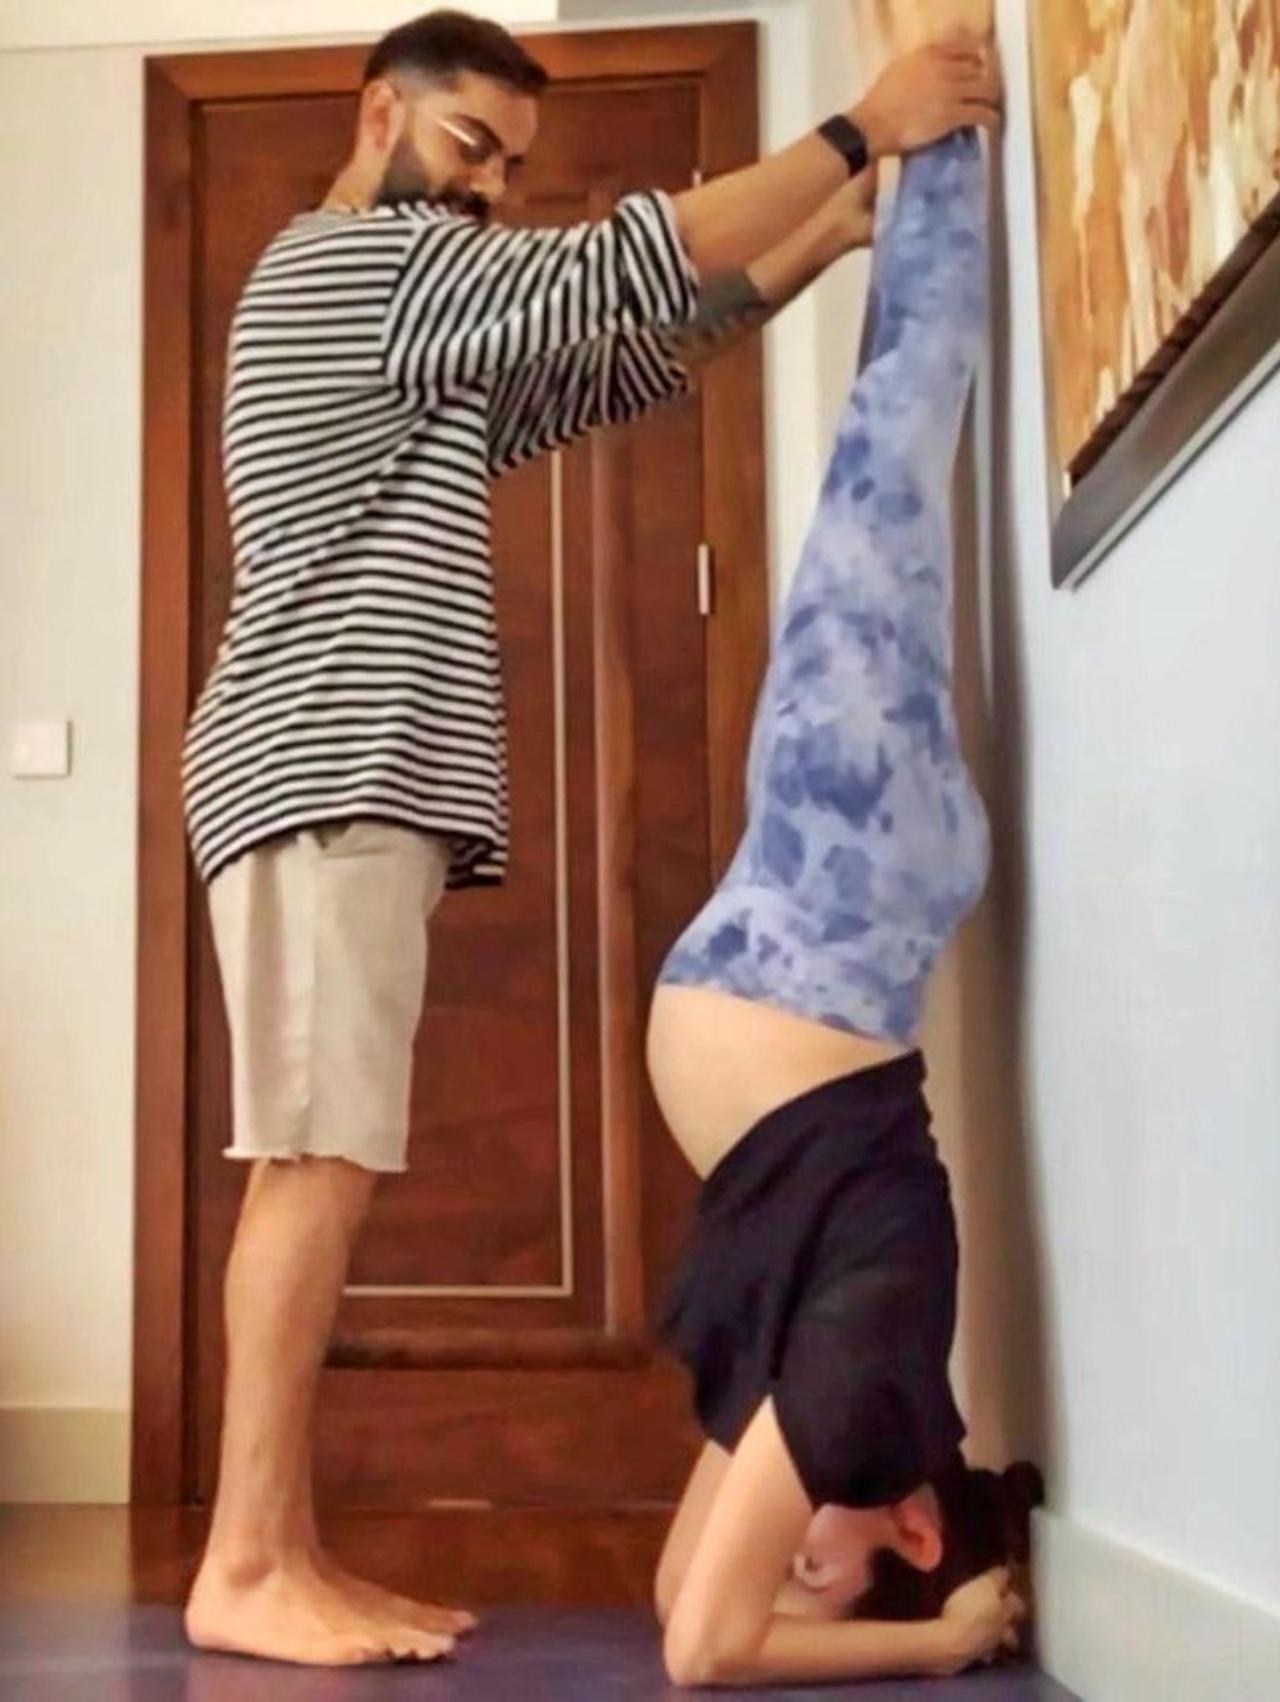 Anushka Sharma
During her pregnancy, actress Anushka Sharma shared a picture of herself doing a Shirshana. In the picture, her husband Virat Kohli could be seen giving her support. In the caption for the post, she explained in detail about doing the asana and how her doctor had approved of it